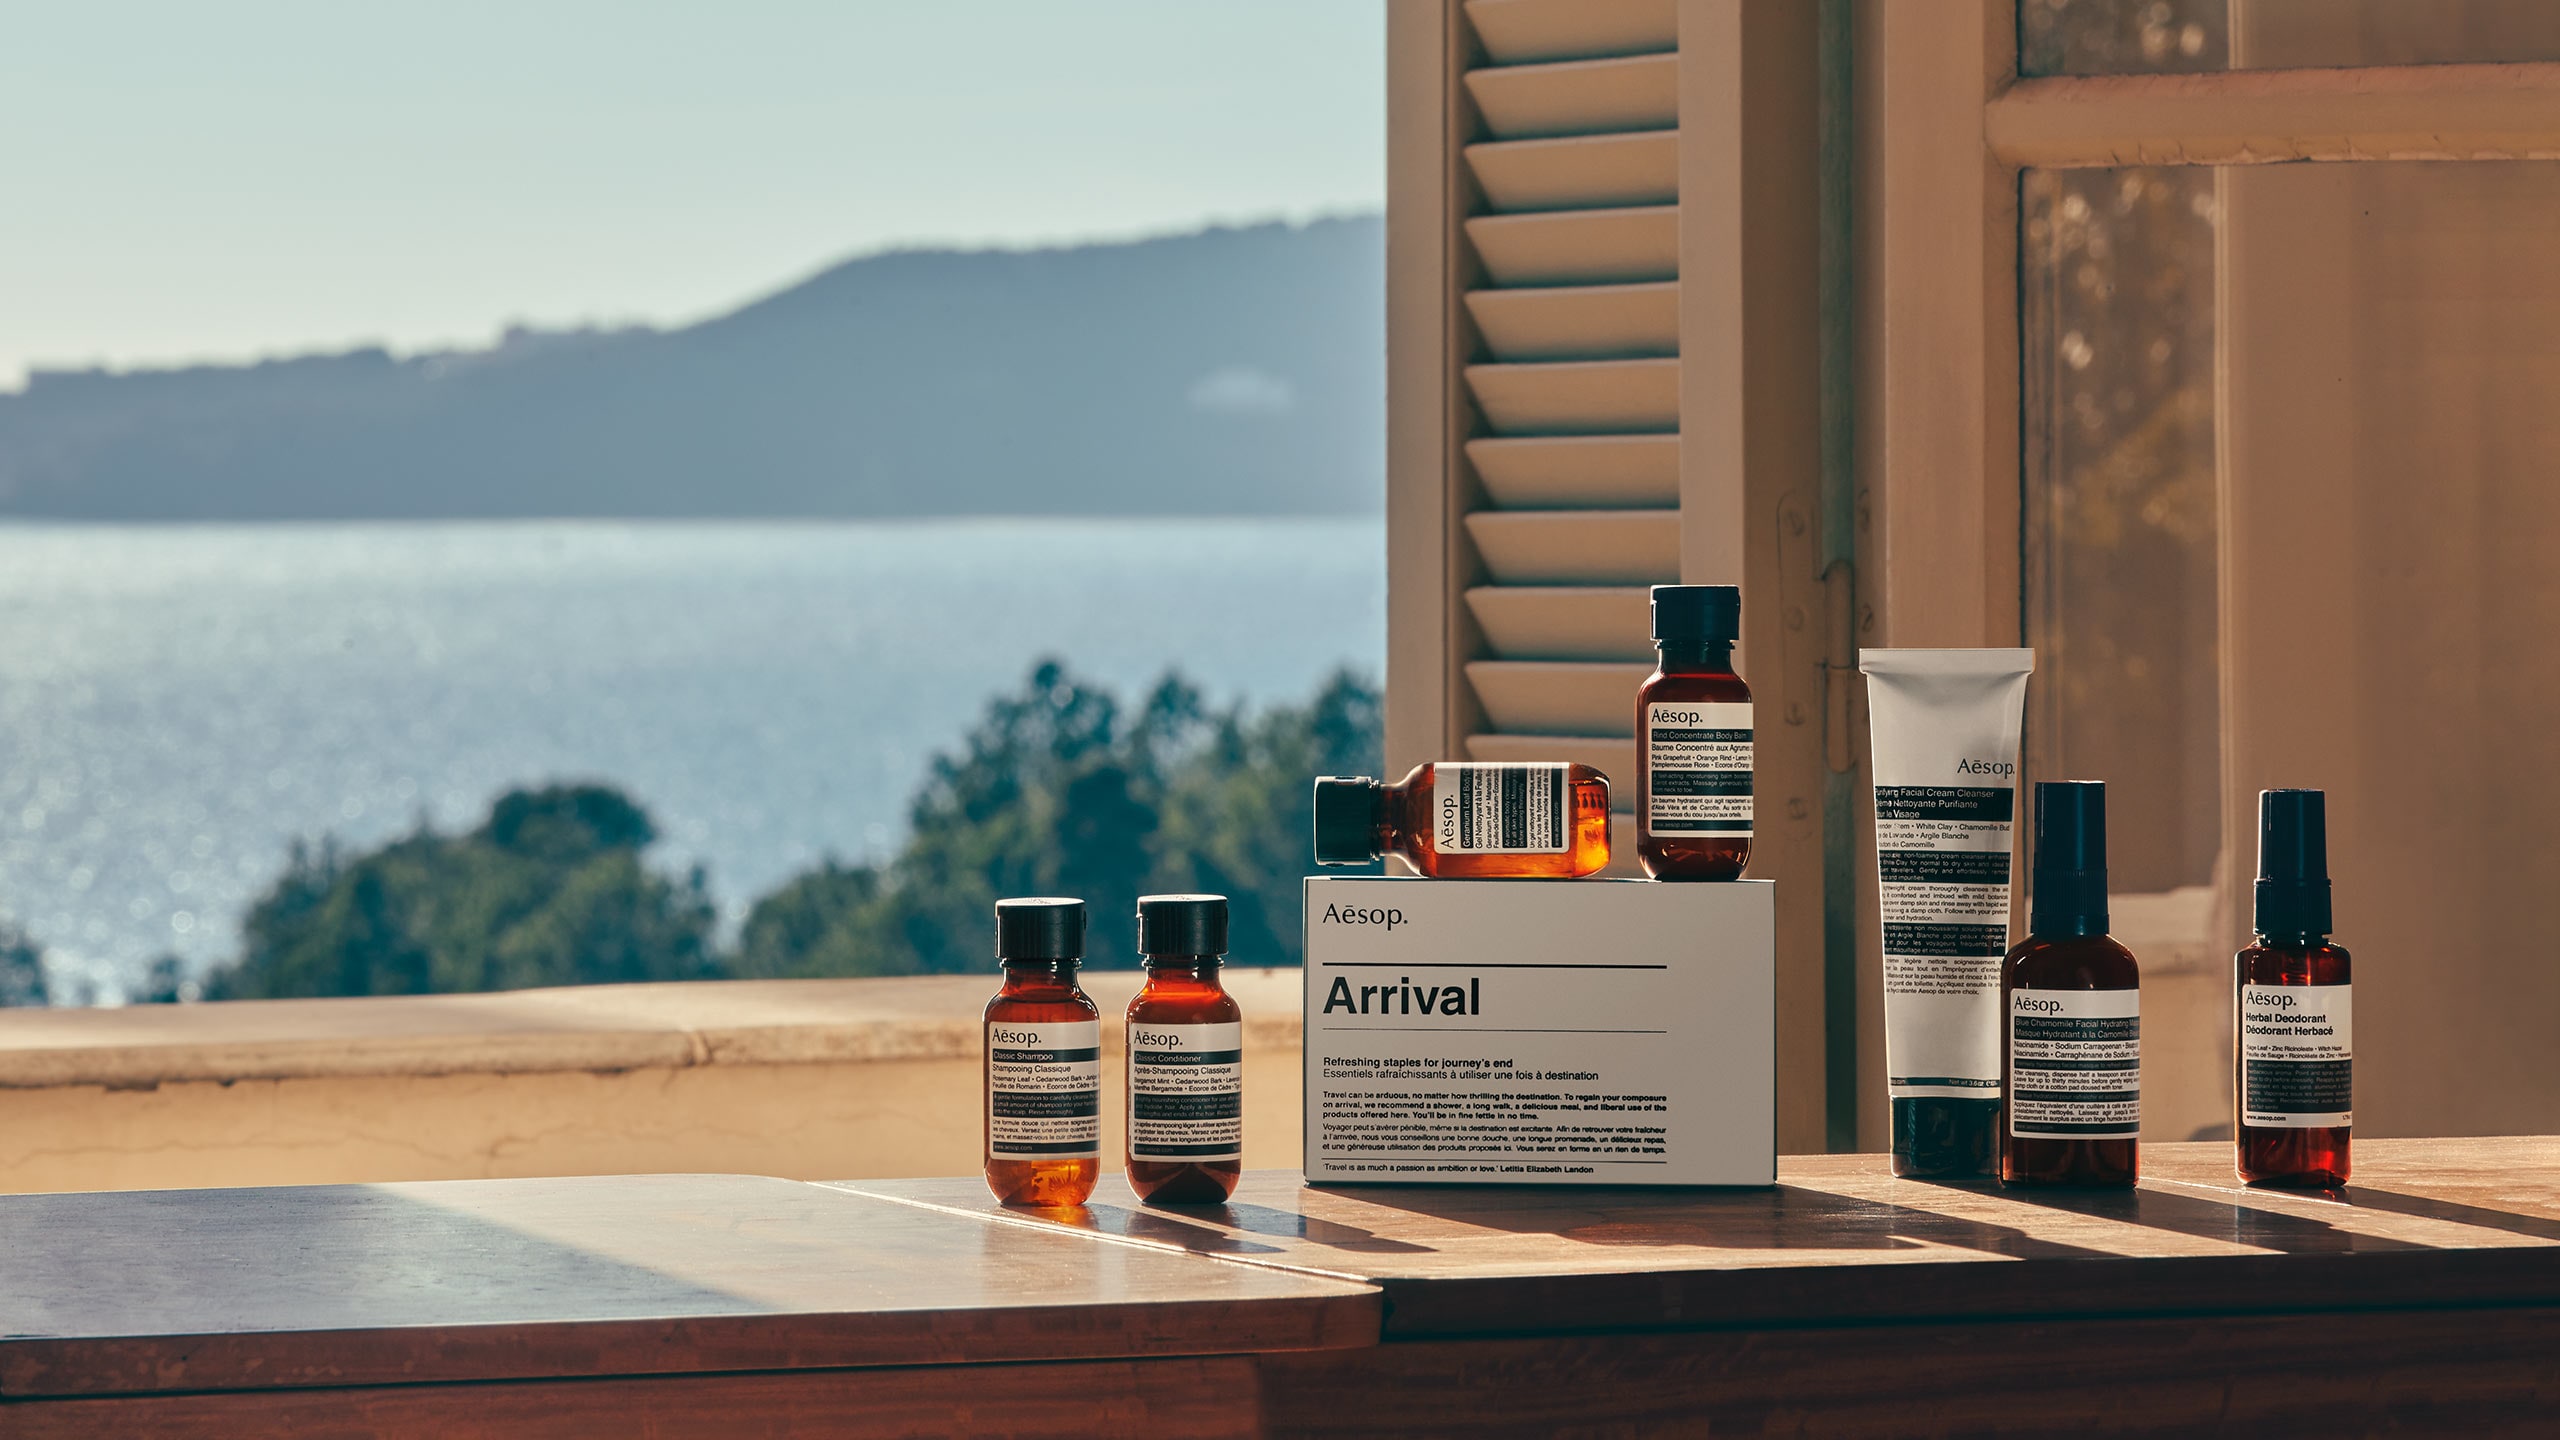 Aesop products in front of a window looking out to the ocean and blue sky